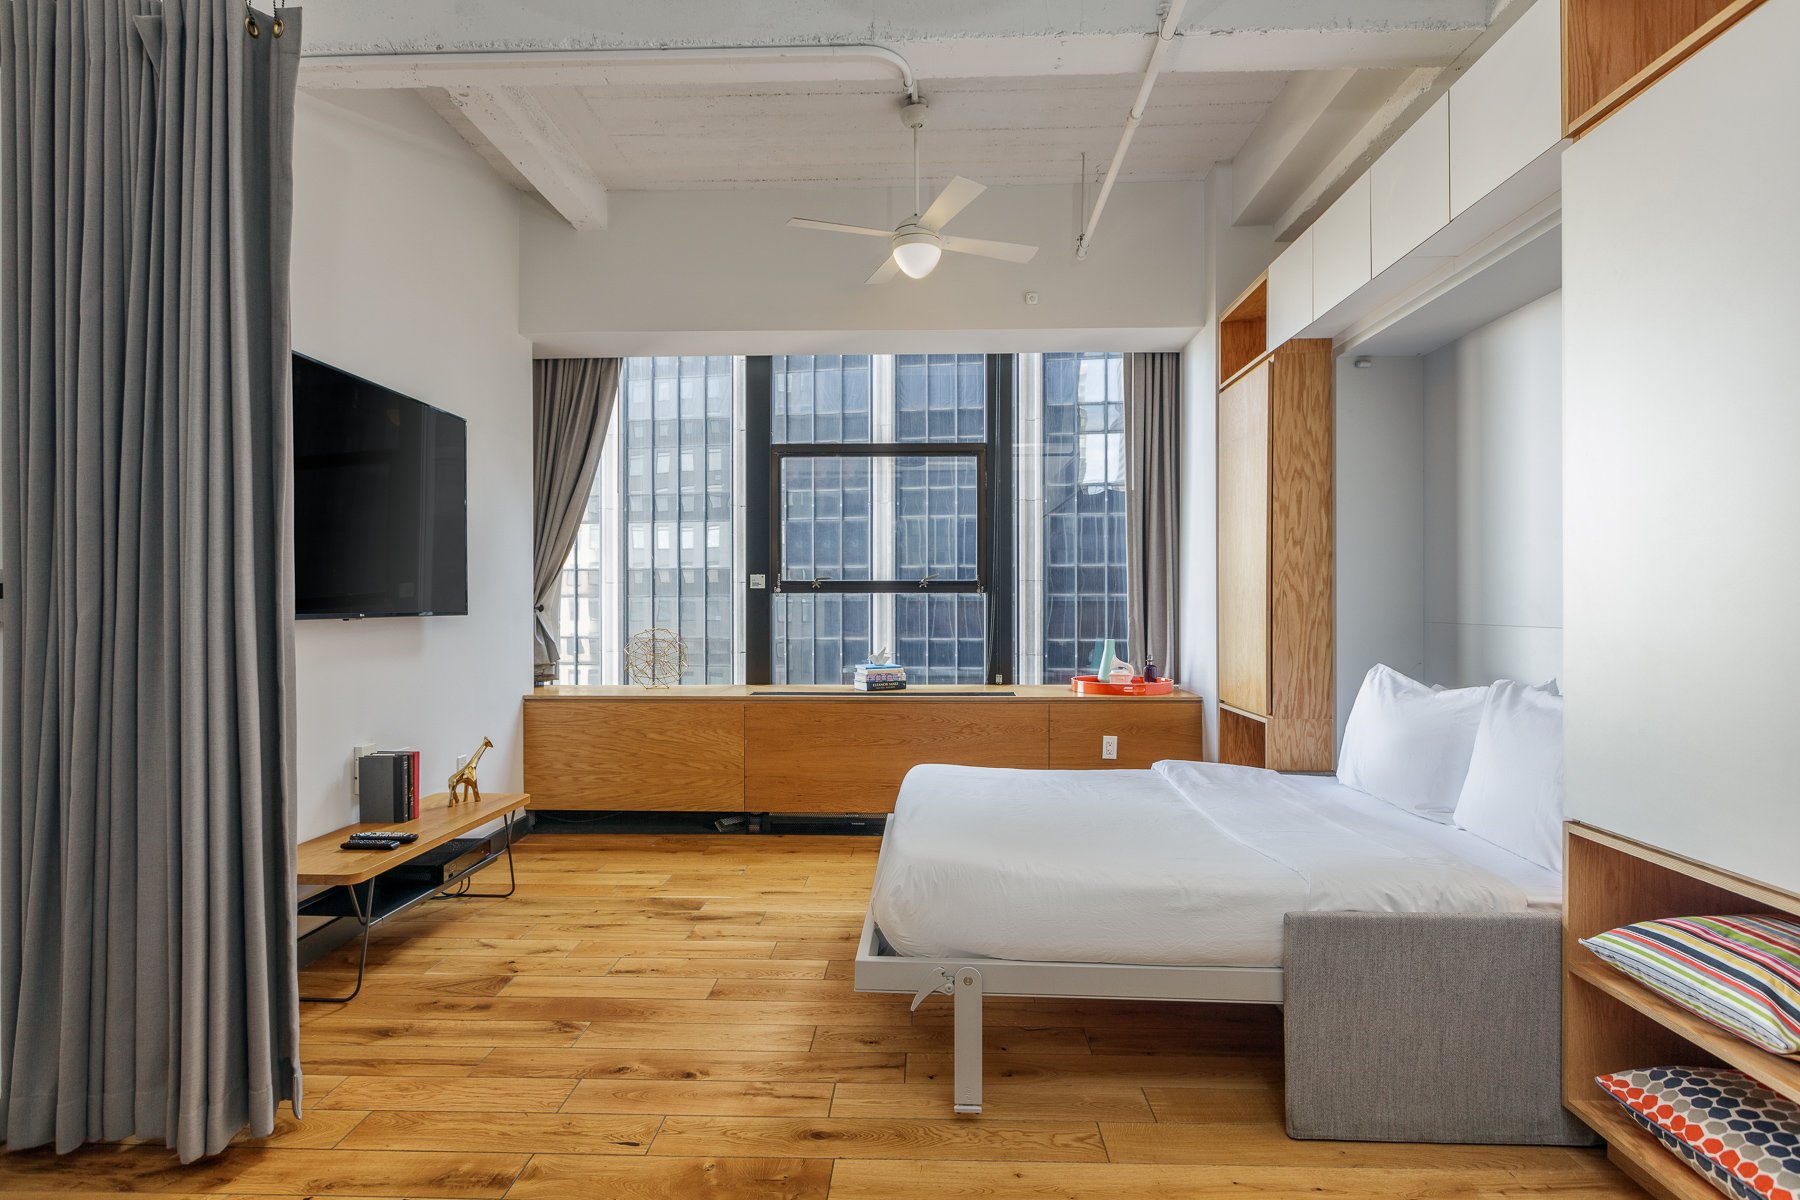 Murphy bed, television, and city views. 